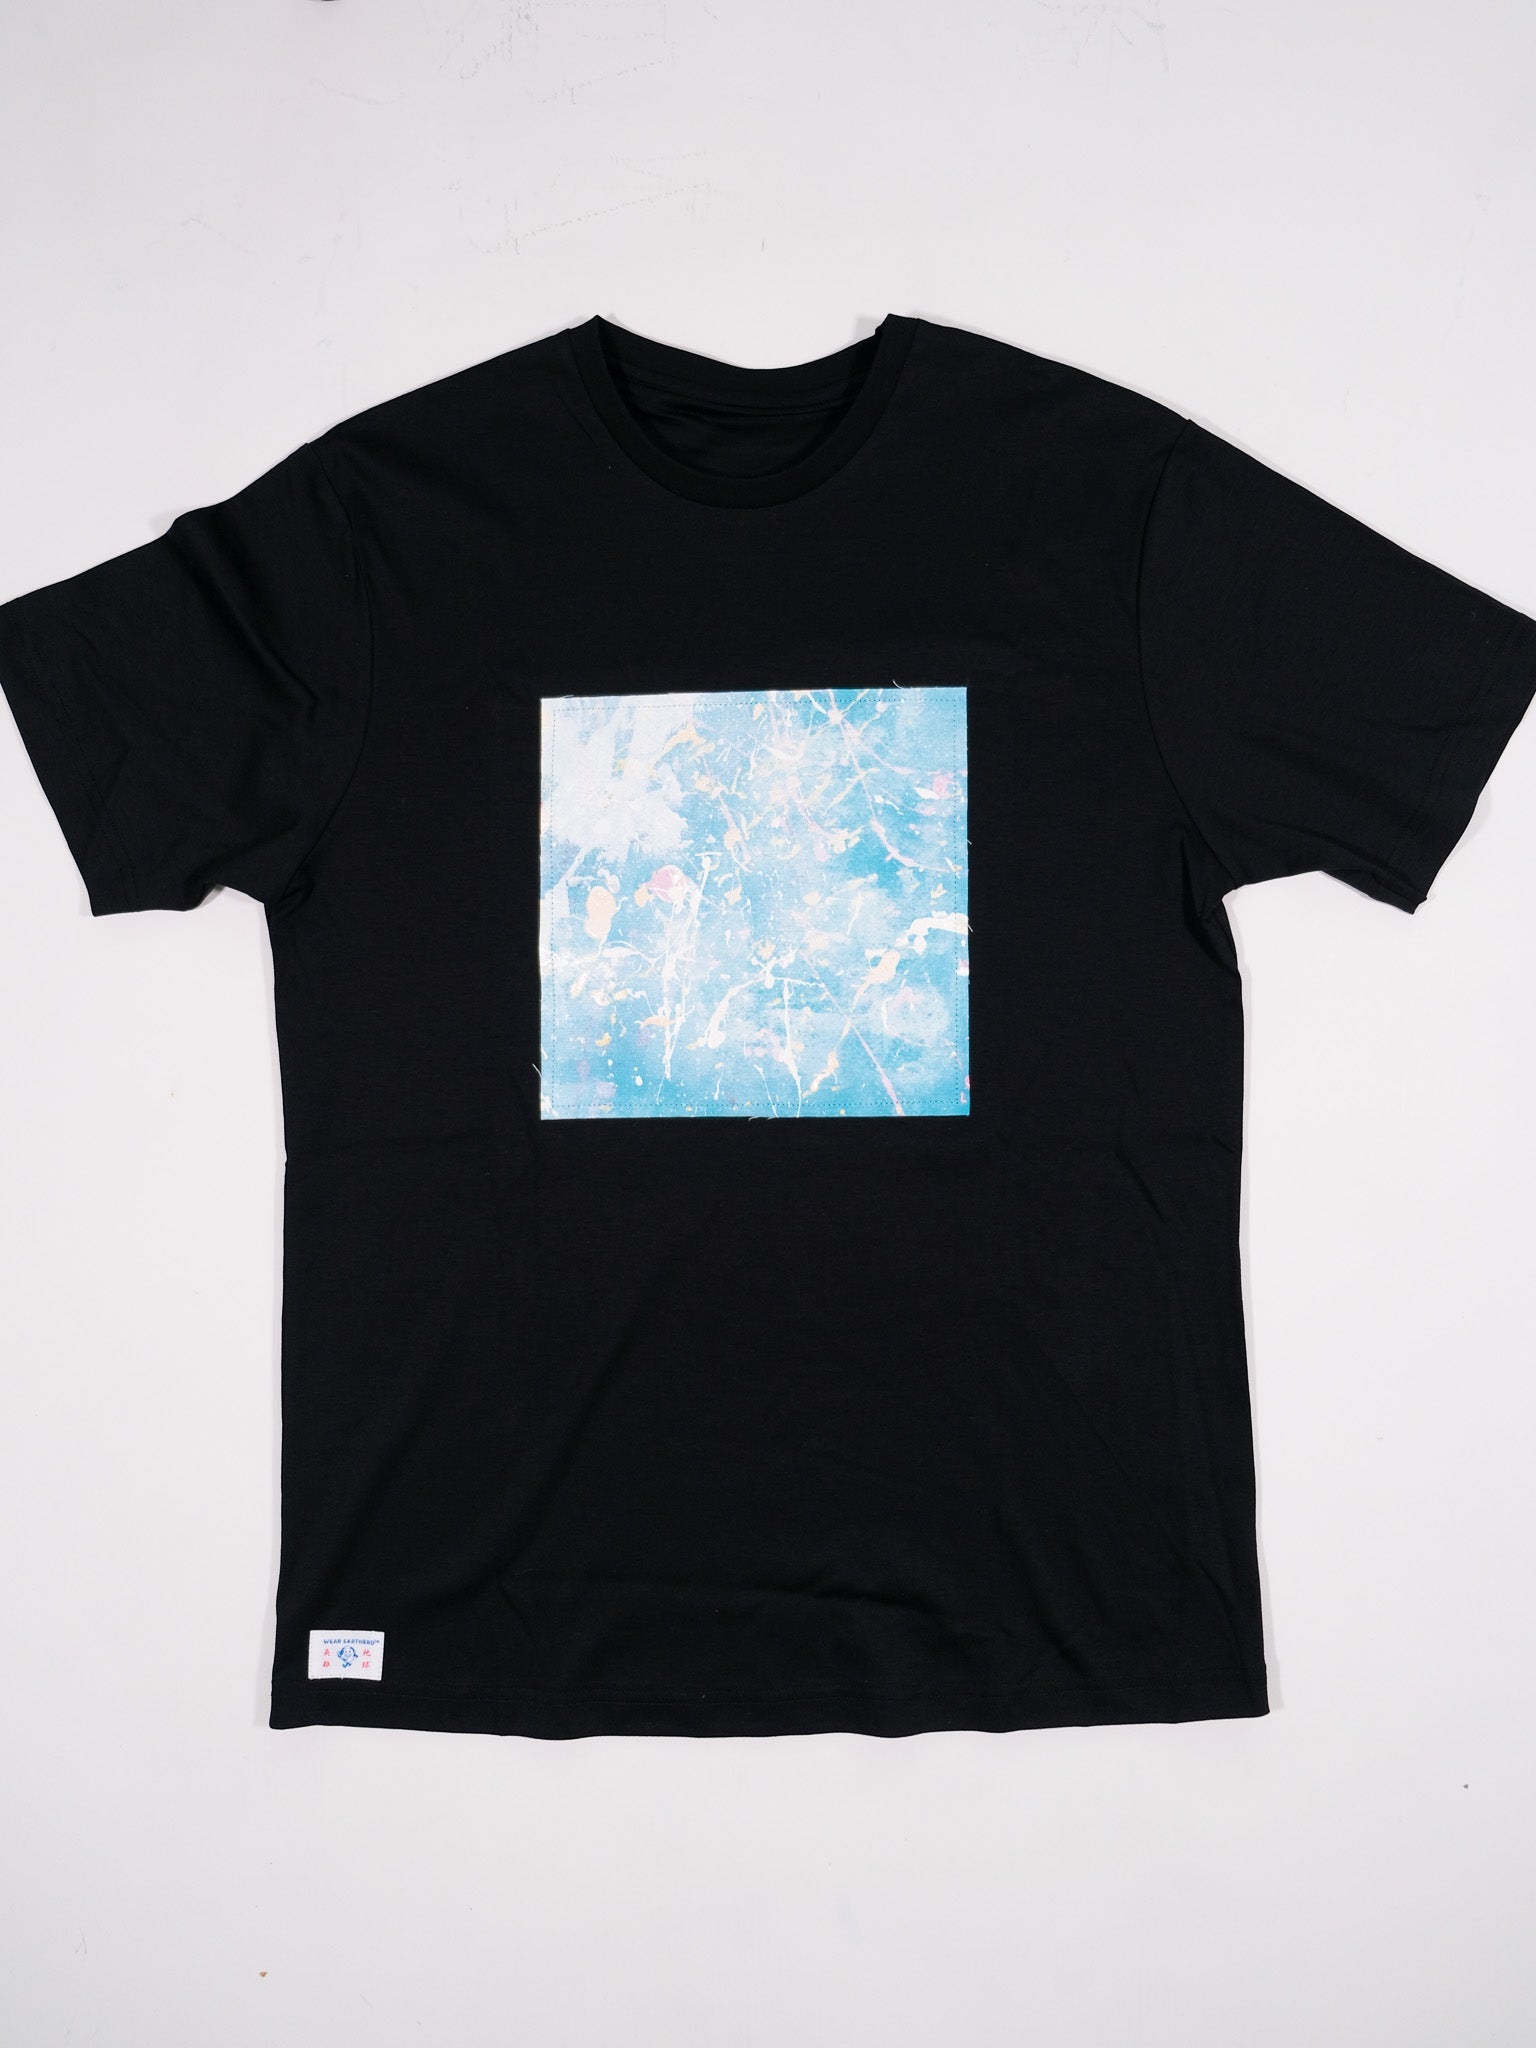 IRIS YUNG - Daydream Believer Art-isan Collective Patched T-Shirt No. 9 Extra Large